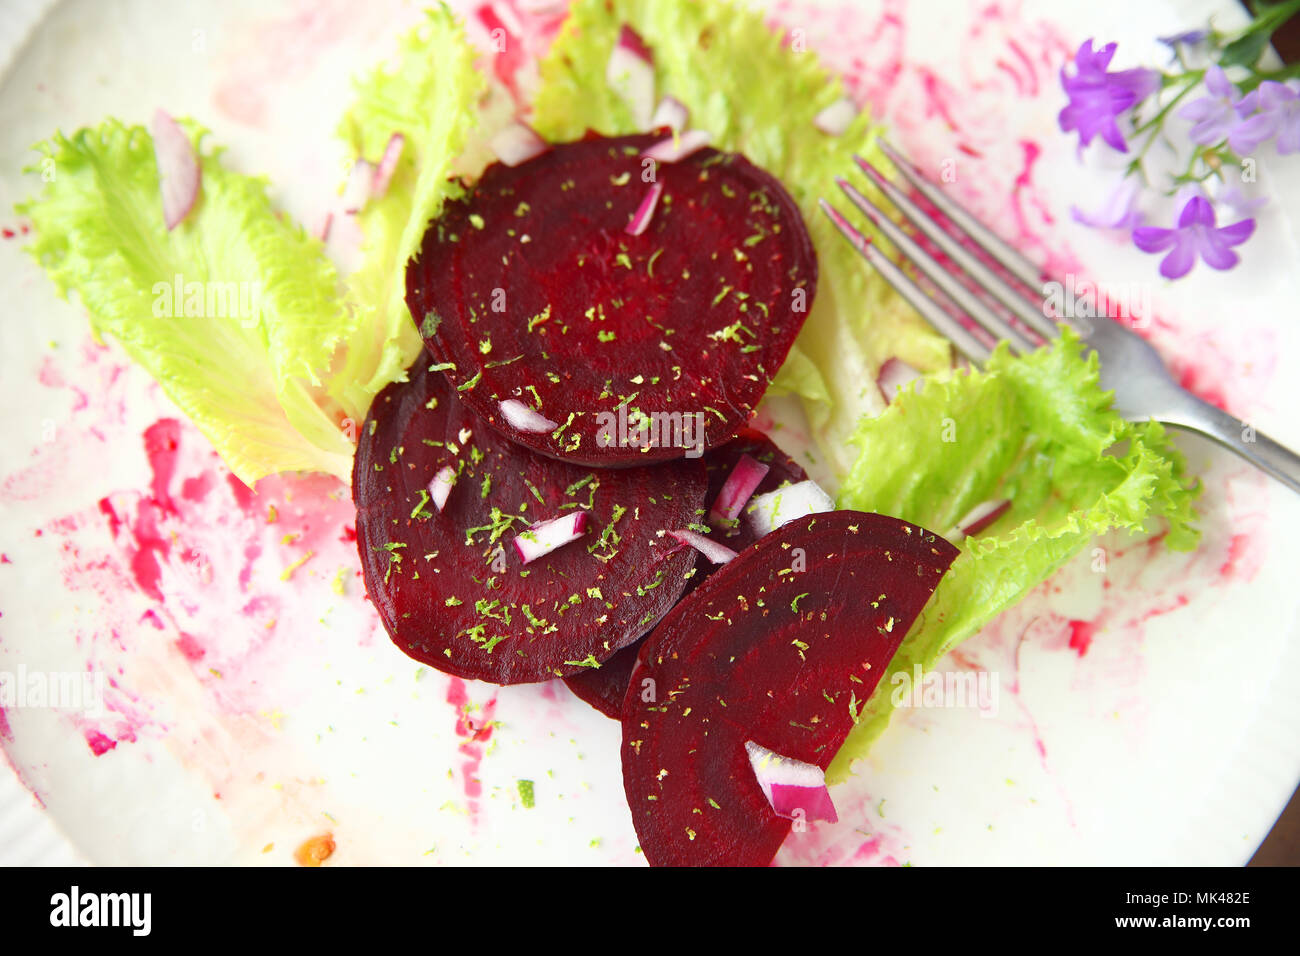 Beet slices with red onion bits, lettuce and grated lime zest on a beet juice-stained plate Stock Photo